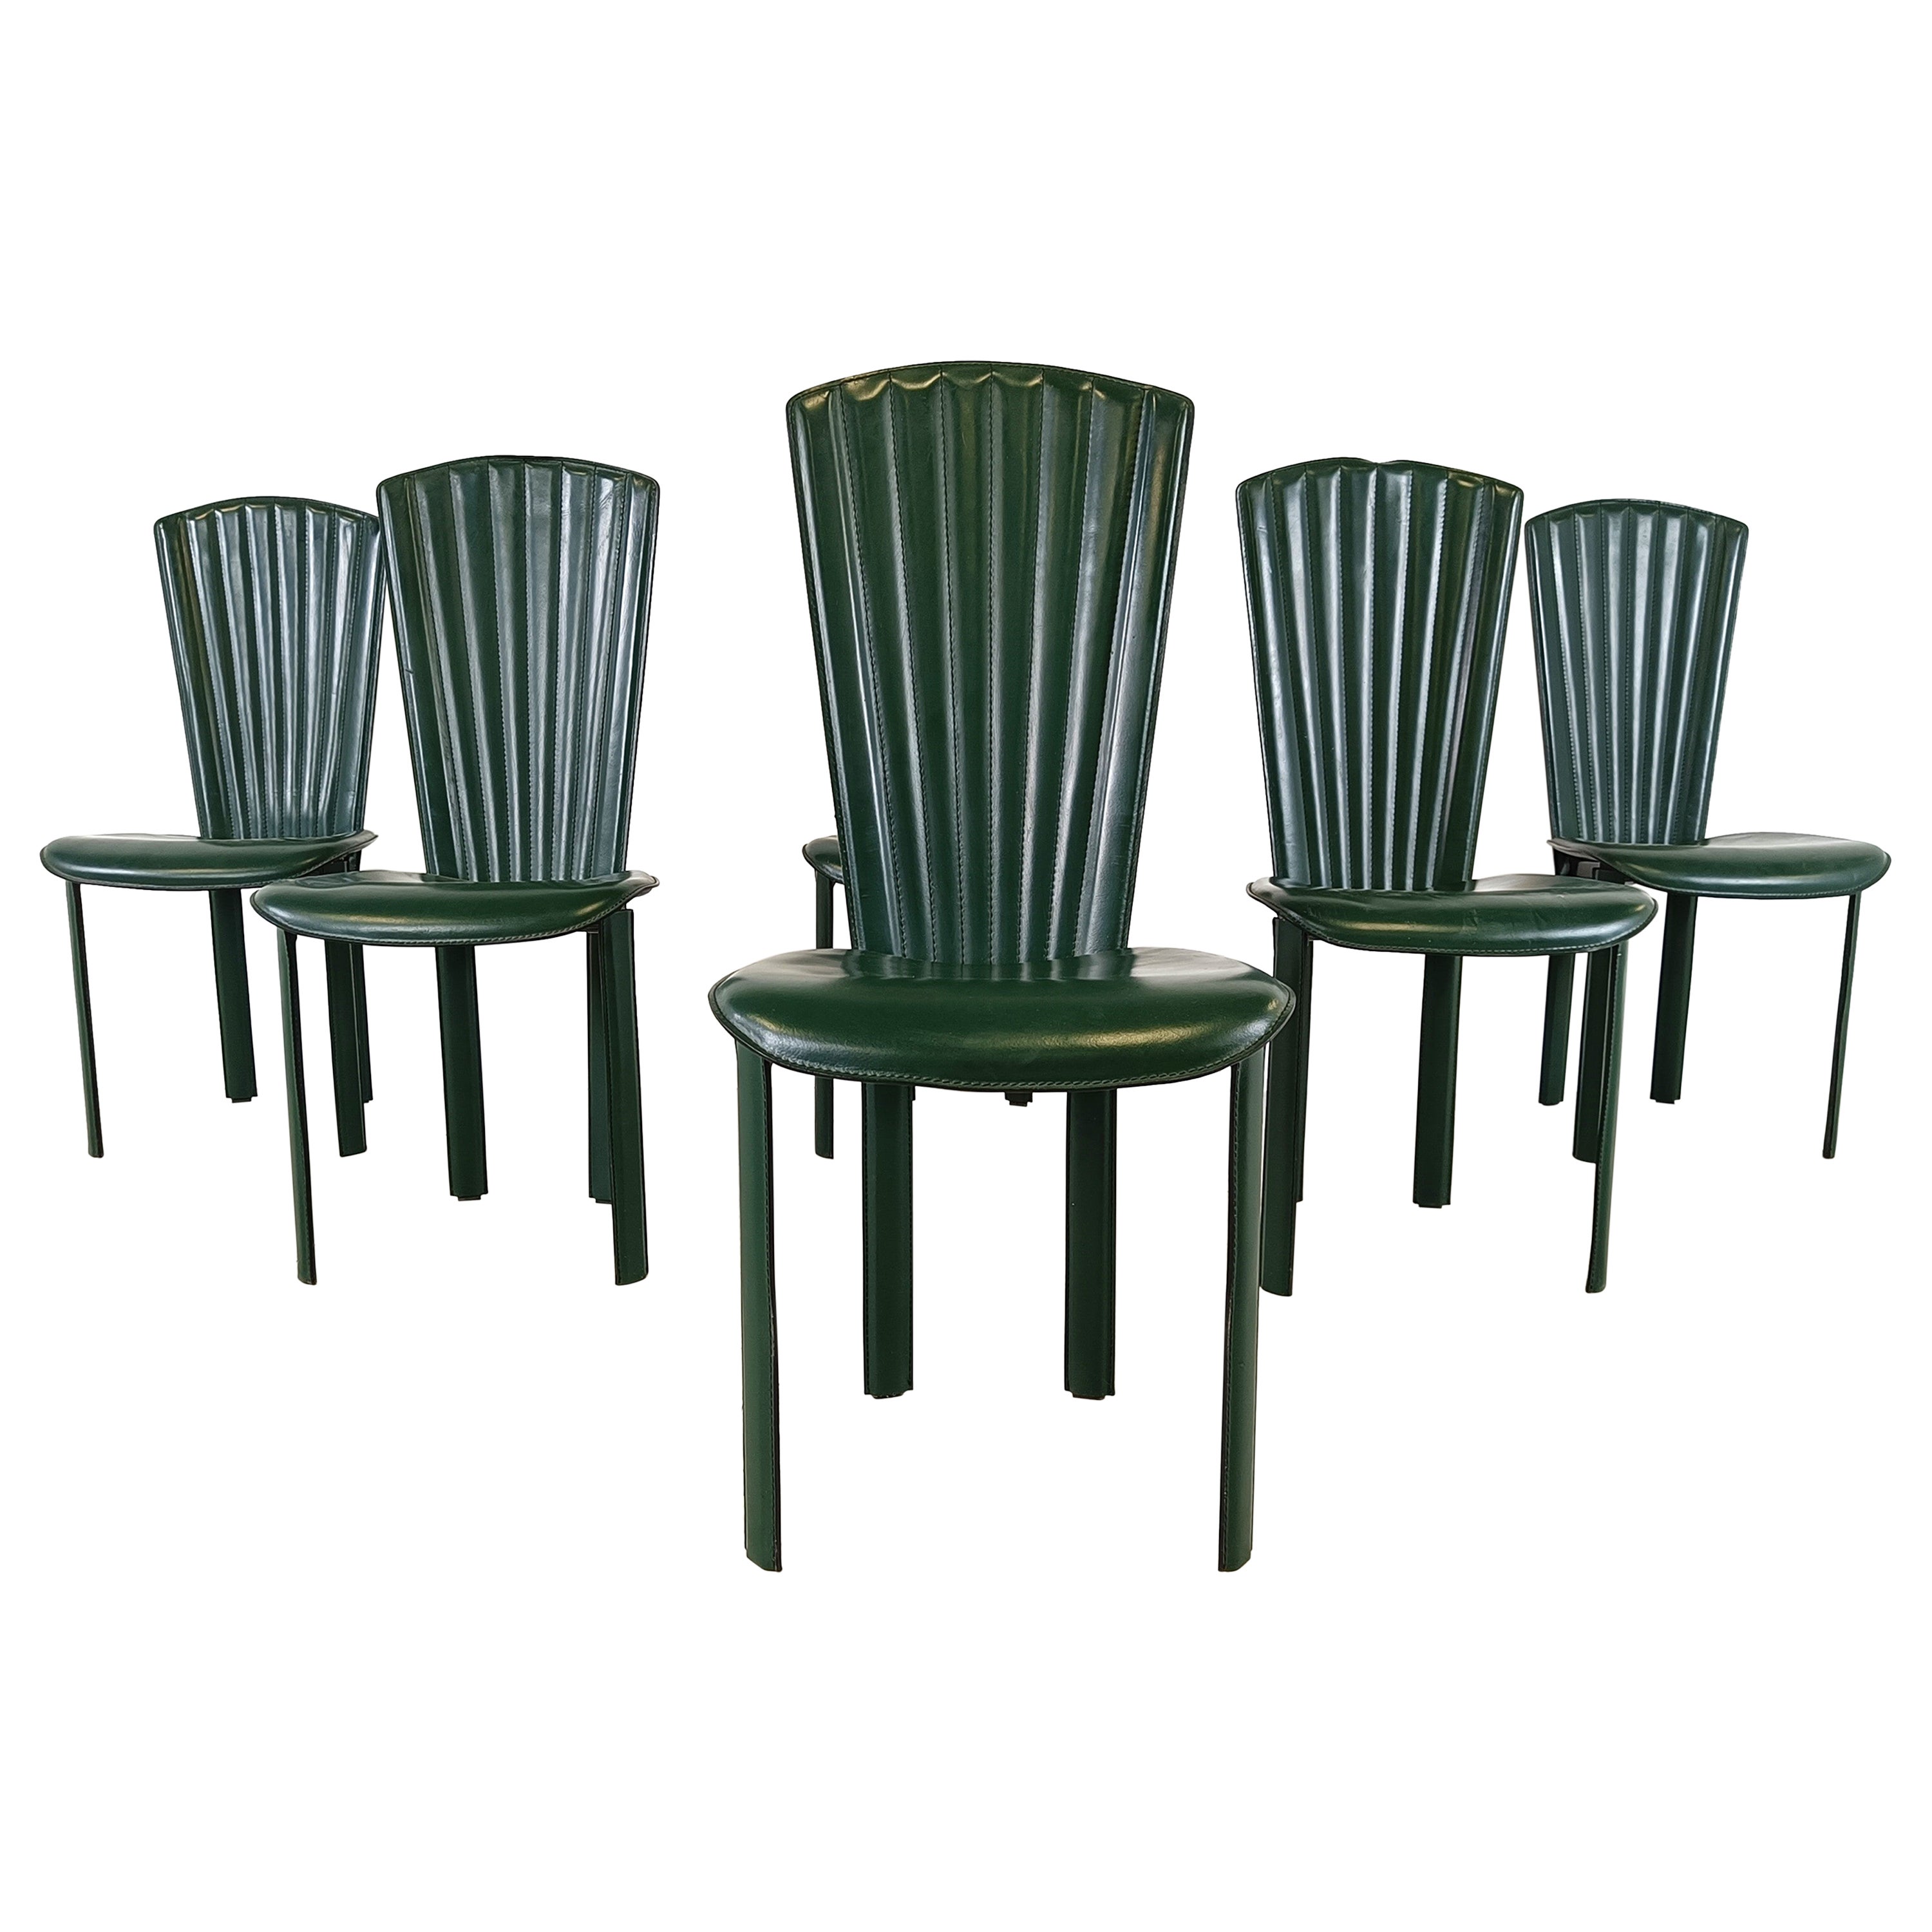 Vintage green leather dining chairs, 1980s - set of 6